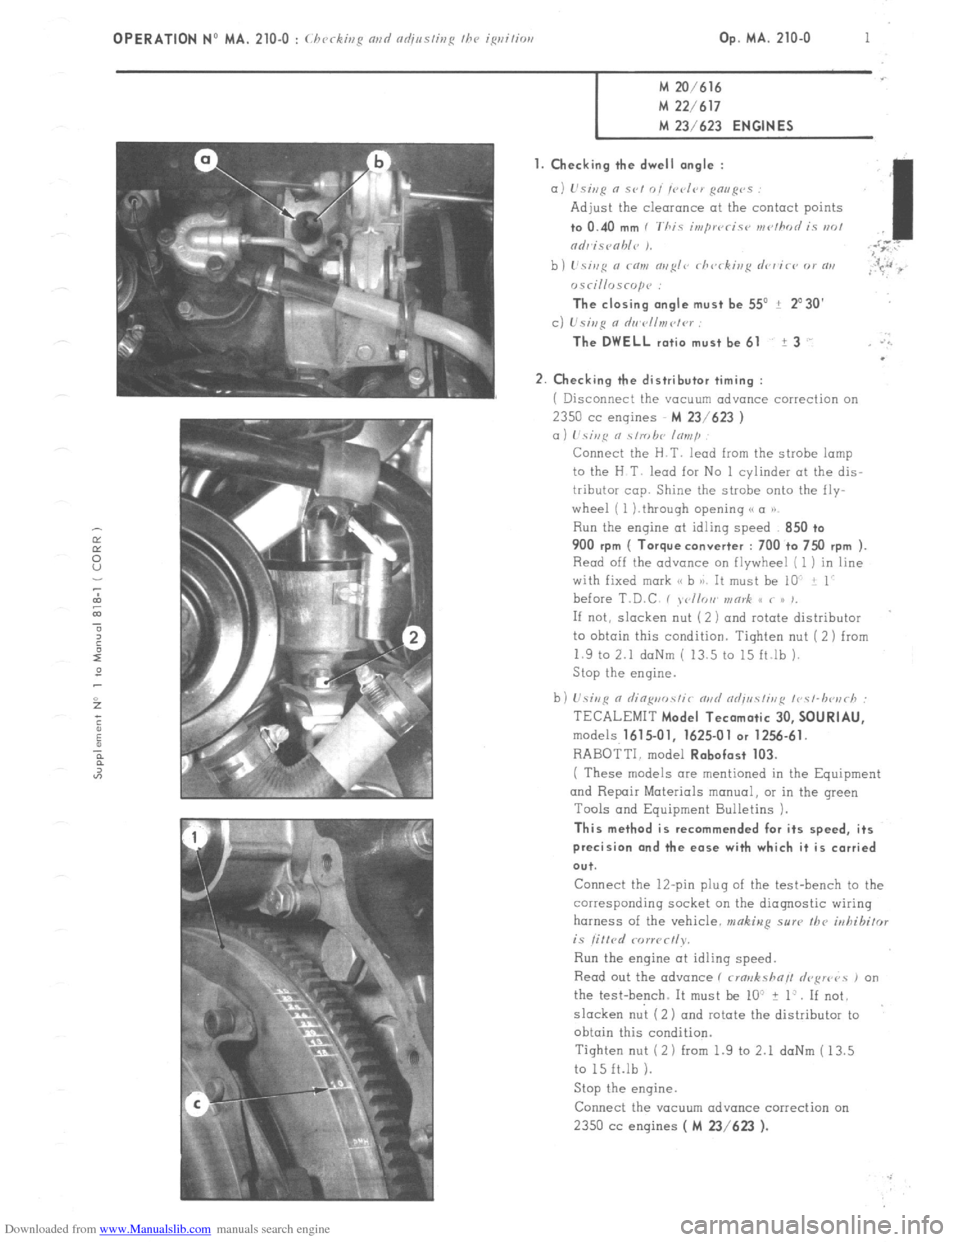 Citroen CX 1981 1.G Workshop Manual Downloaded from www.Manualslib.com manuals search engine OPERATION NO MA. 210-o : chcJckir,R fl,,d fld;linshp the, iRrlihil Op. MA. 210-O 1 
M 20/616 M 22/617 
M 23/623 
ENGINES 
1. Checking the dwell